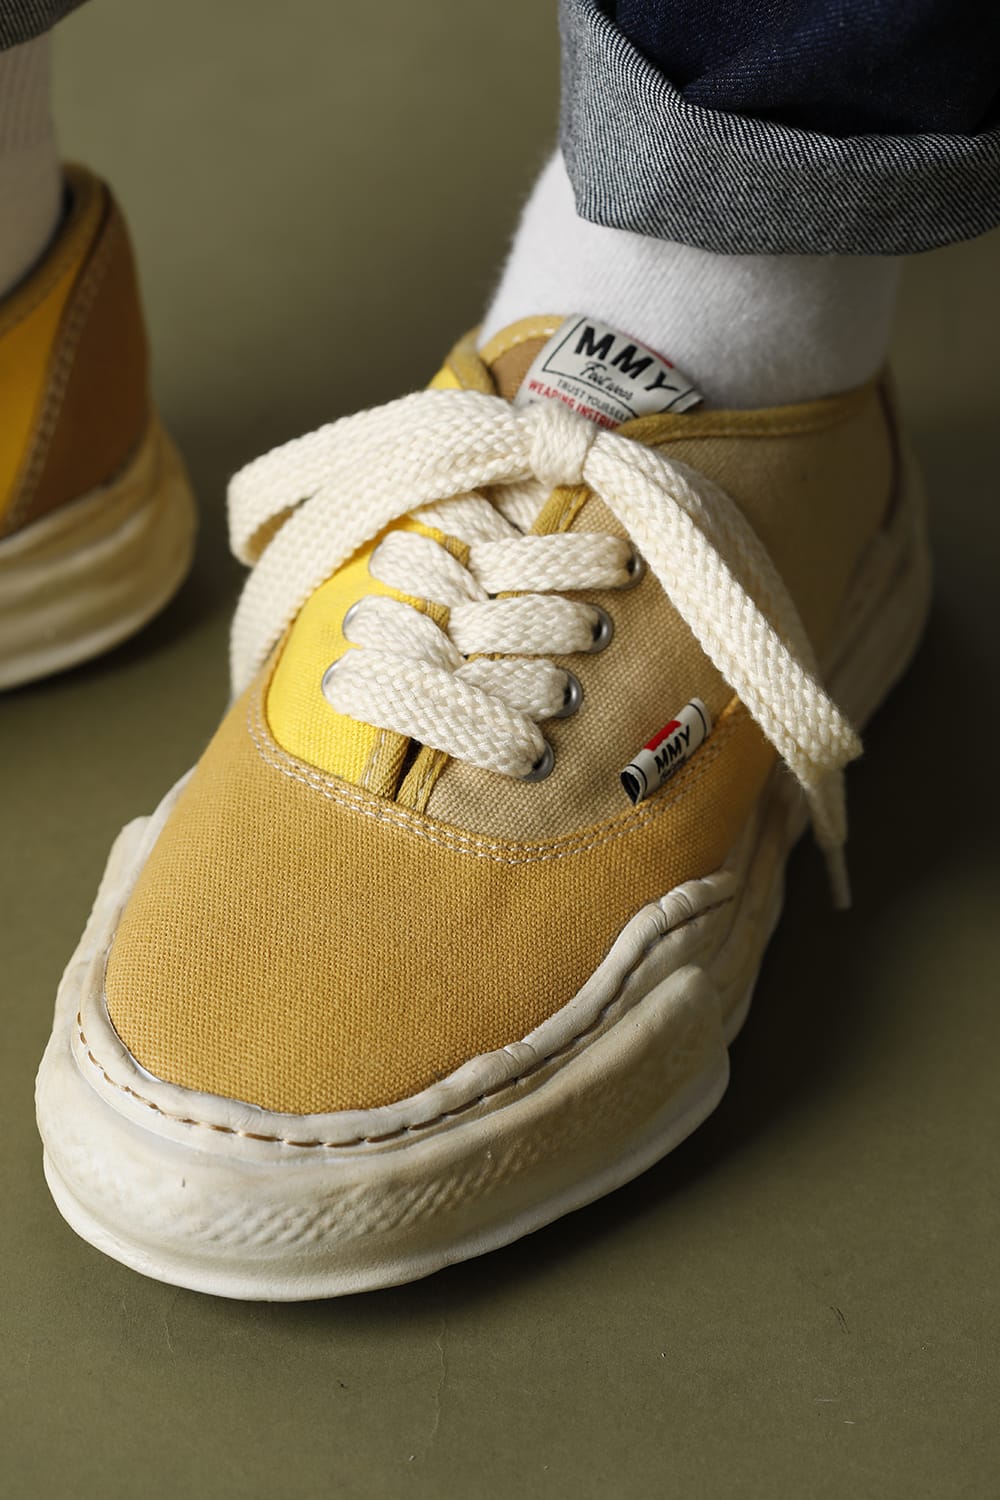 -BAKER- Over-dyed original sole canvas Low-Top sneakers Yellow